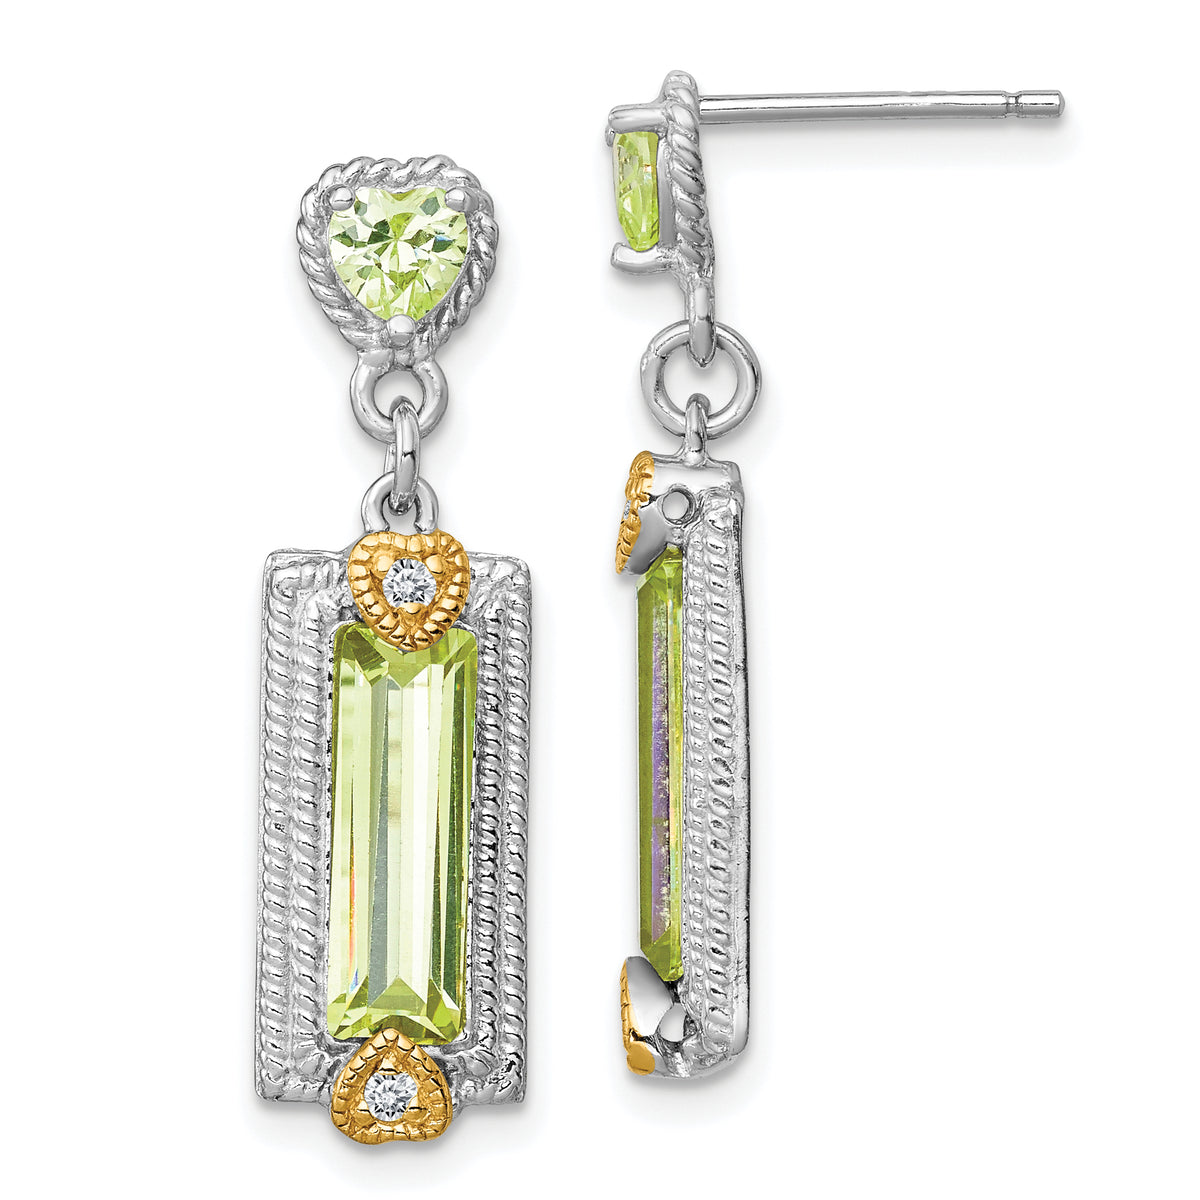 Sterling Silver w/ Gold-tone Vermeil Polished & Textured Light Green CZ Hearts Post Dangle Earrings